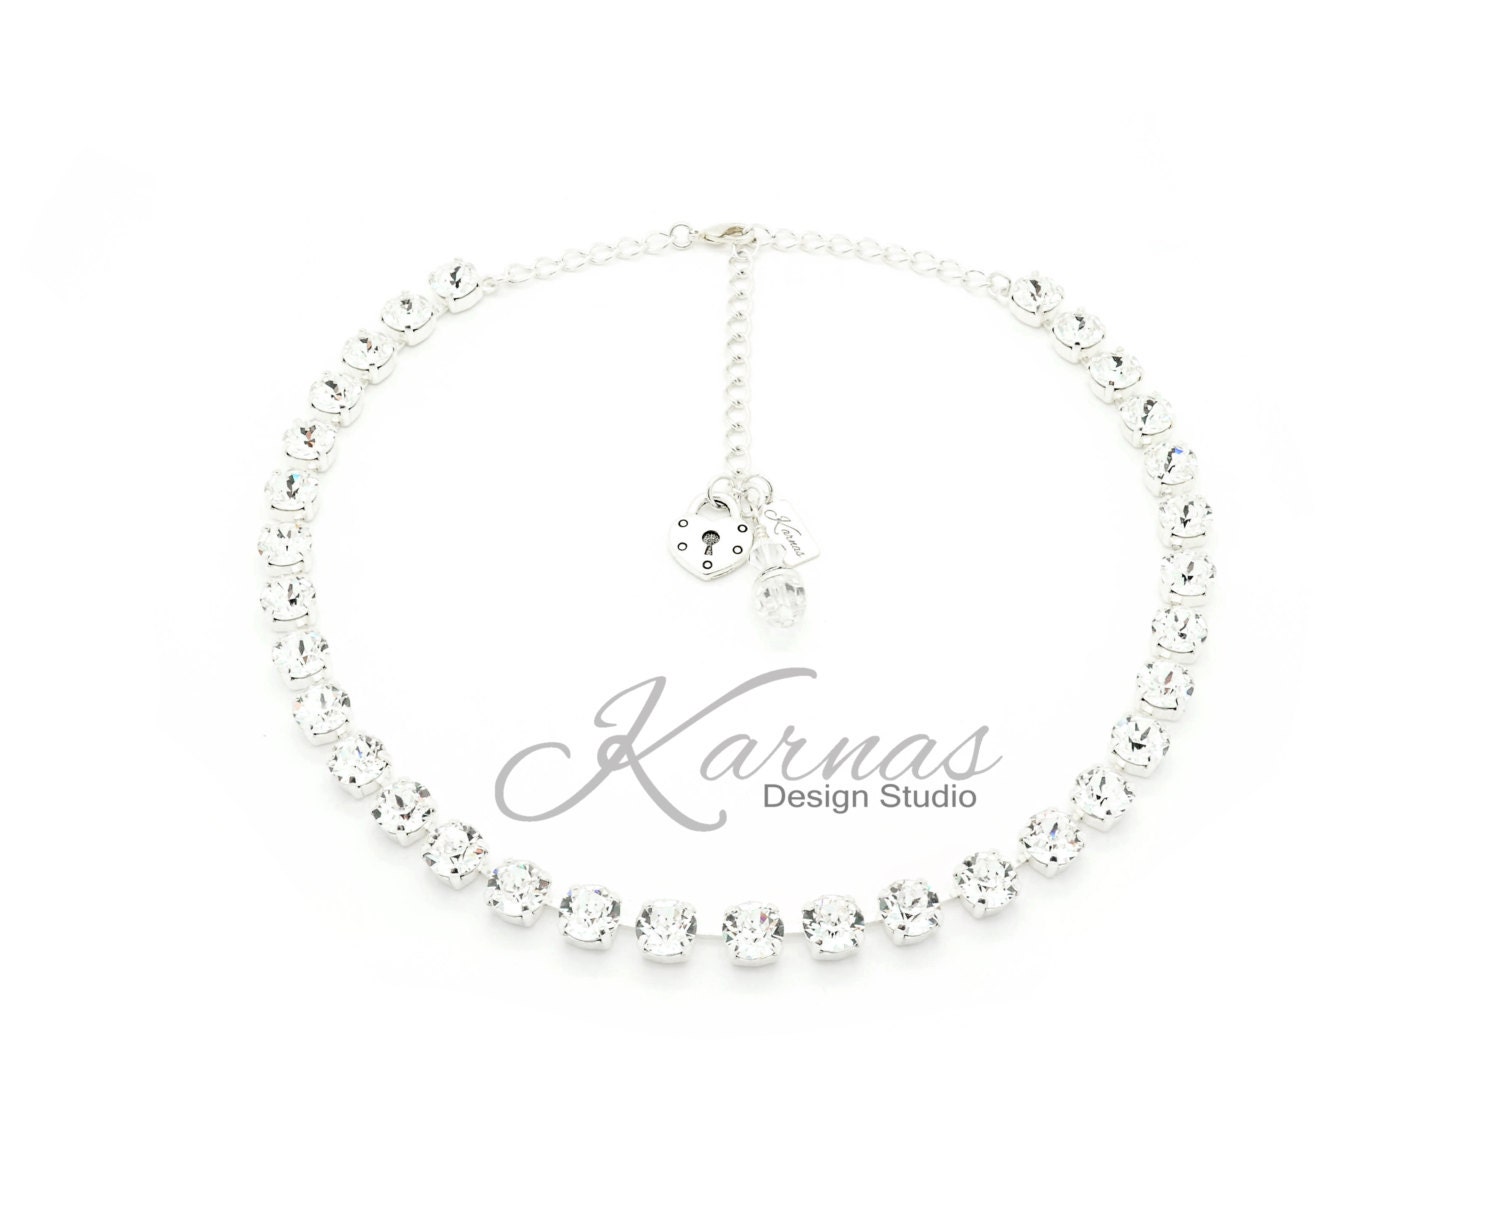 Crystal Clear 8mm Crystal Chaton Necklace Made With K.d.s. Premium Pick Your Metal Karnas Design Studio Free Shipping